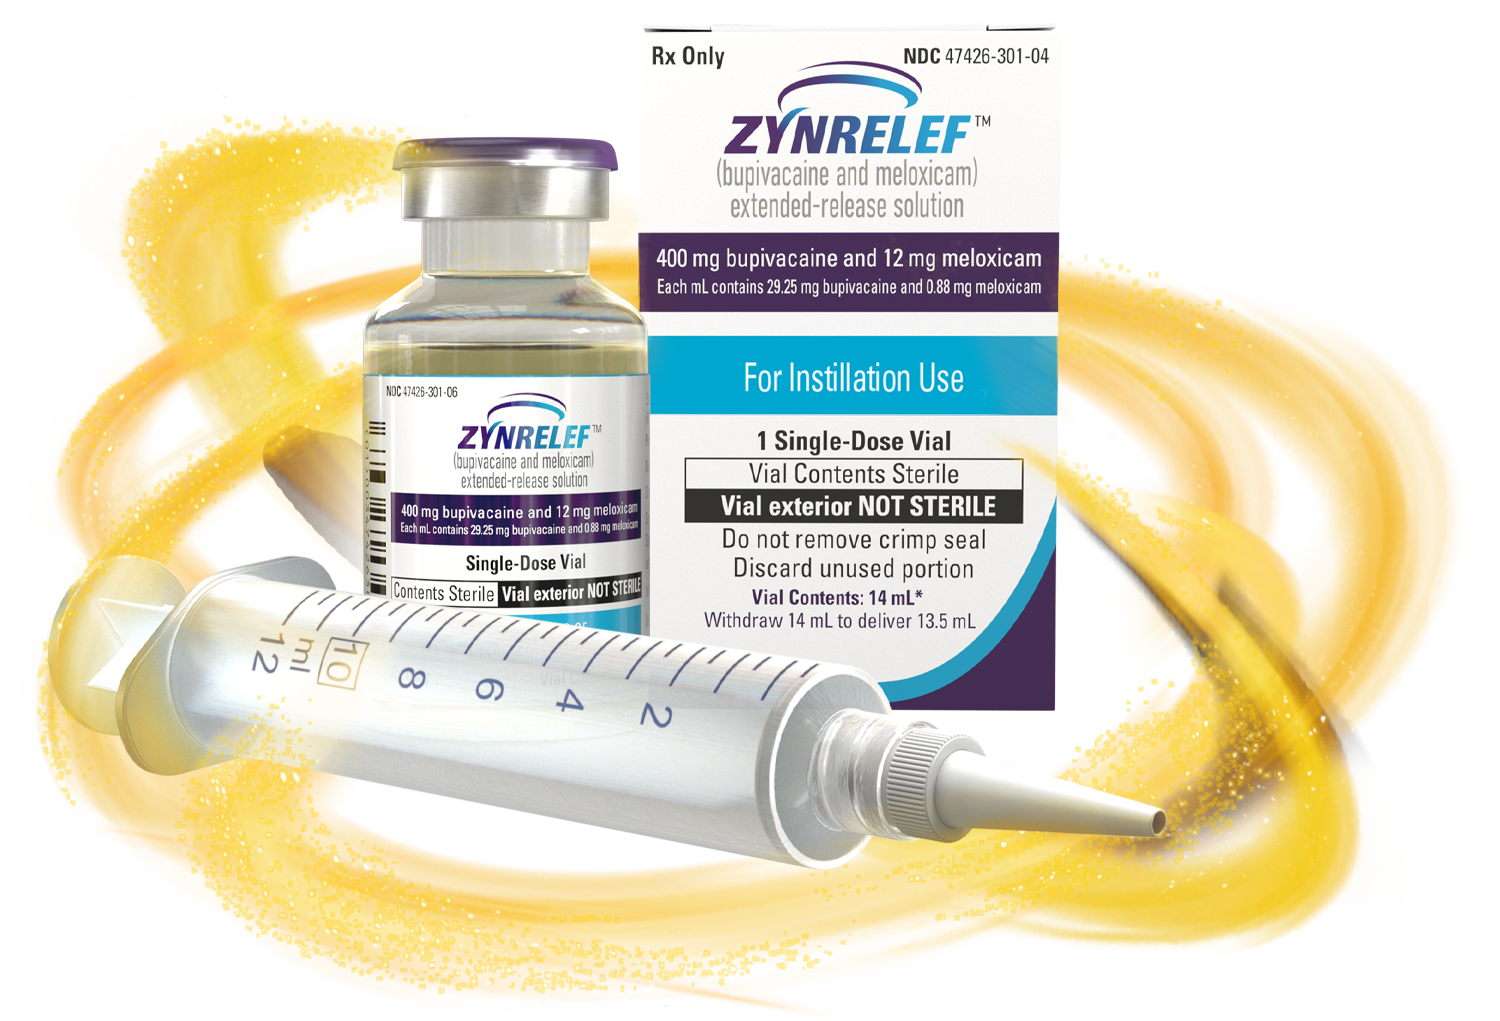 ZYNRELEF box with 400 mg vial next to it; needle-free applicator laying in front of vial and box; all components.